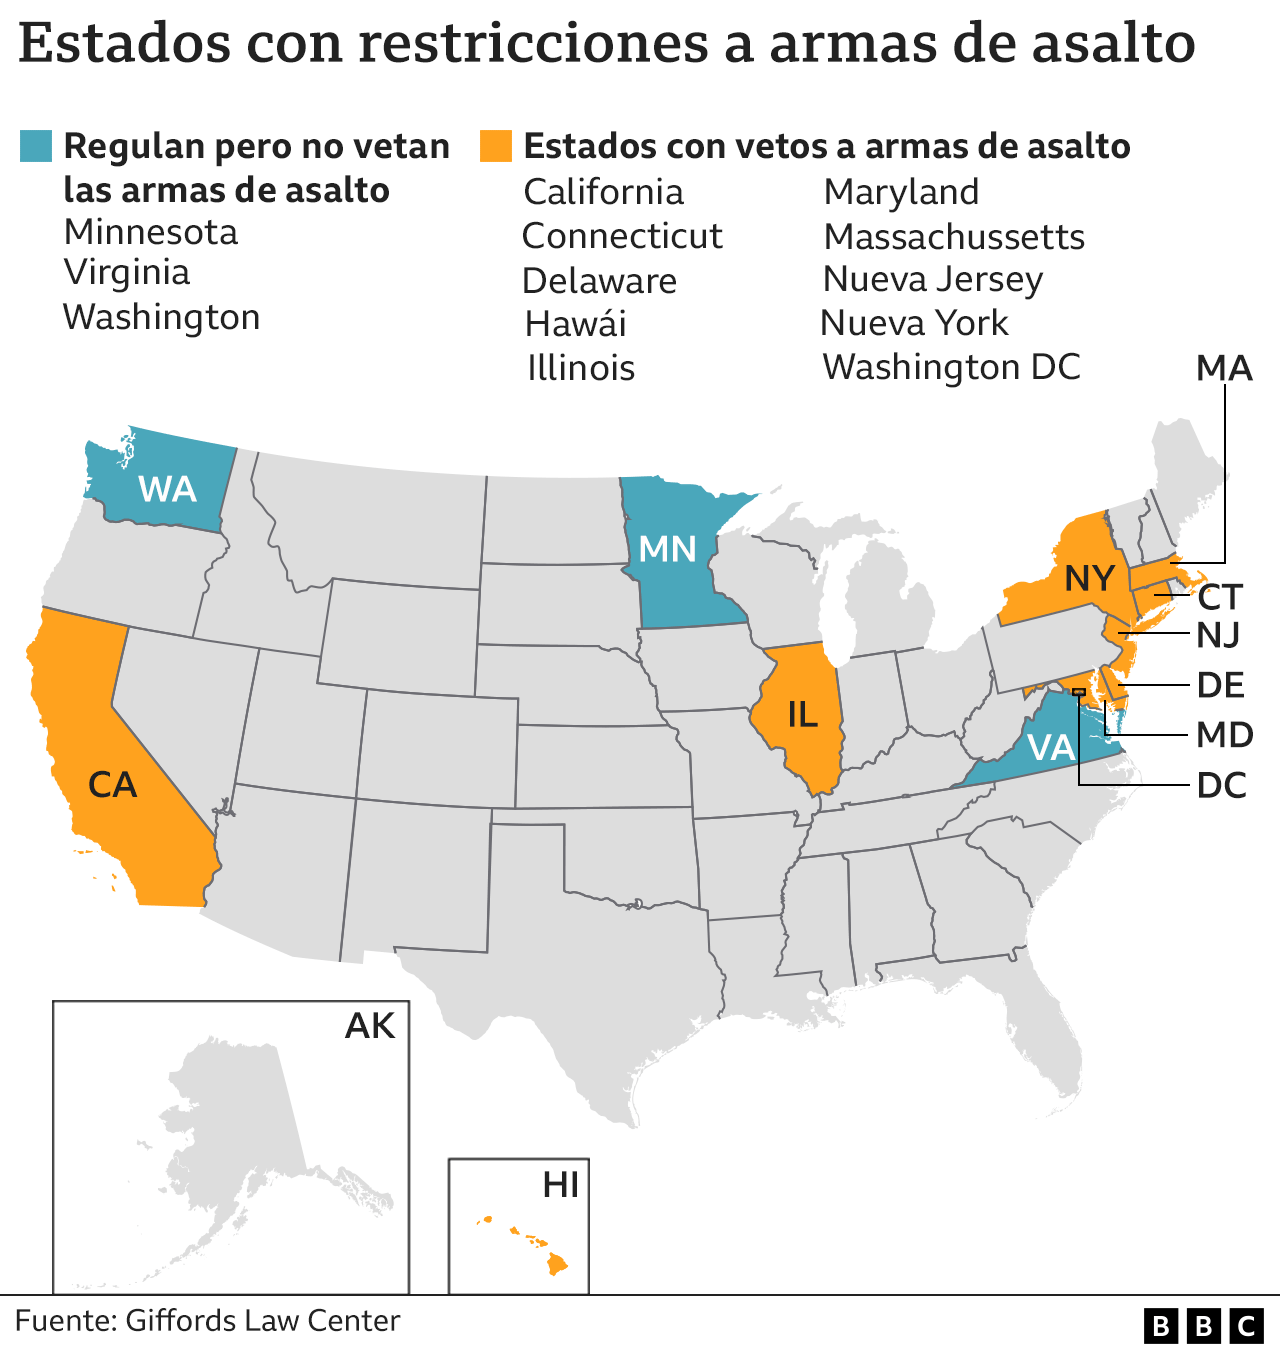 States with restrictions on assault weapons.